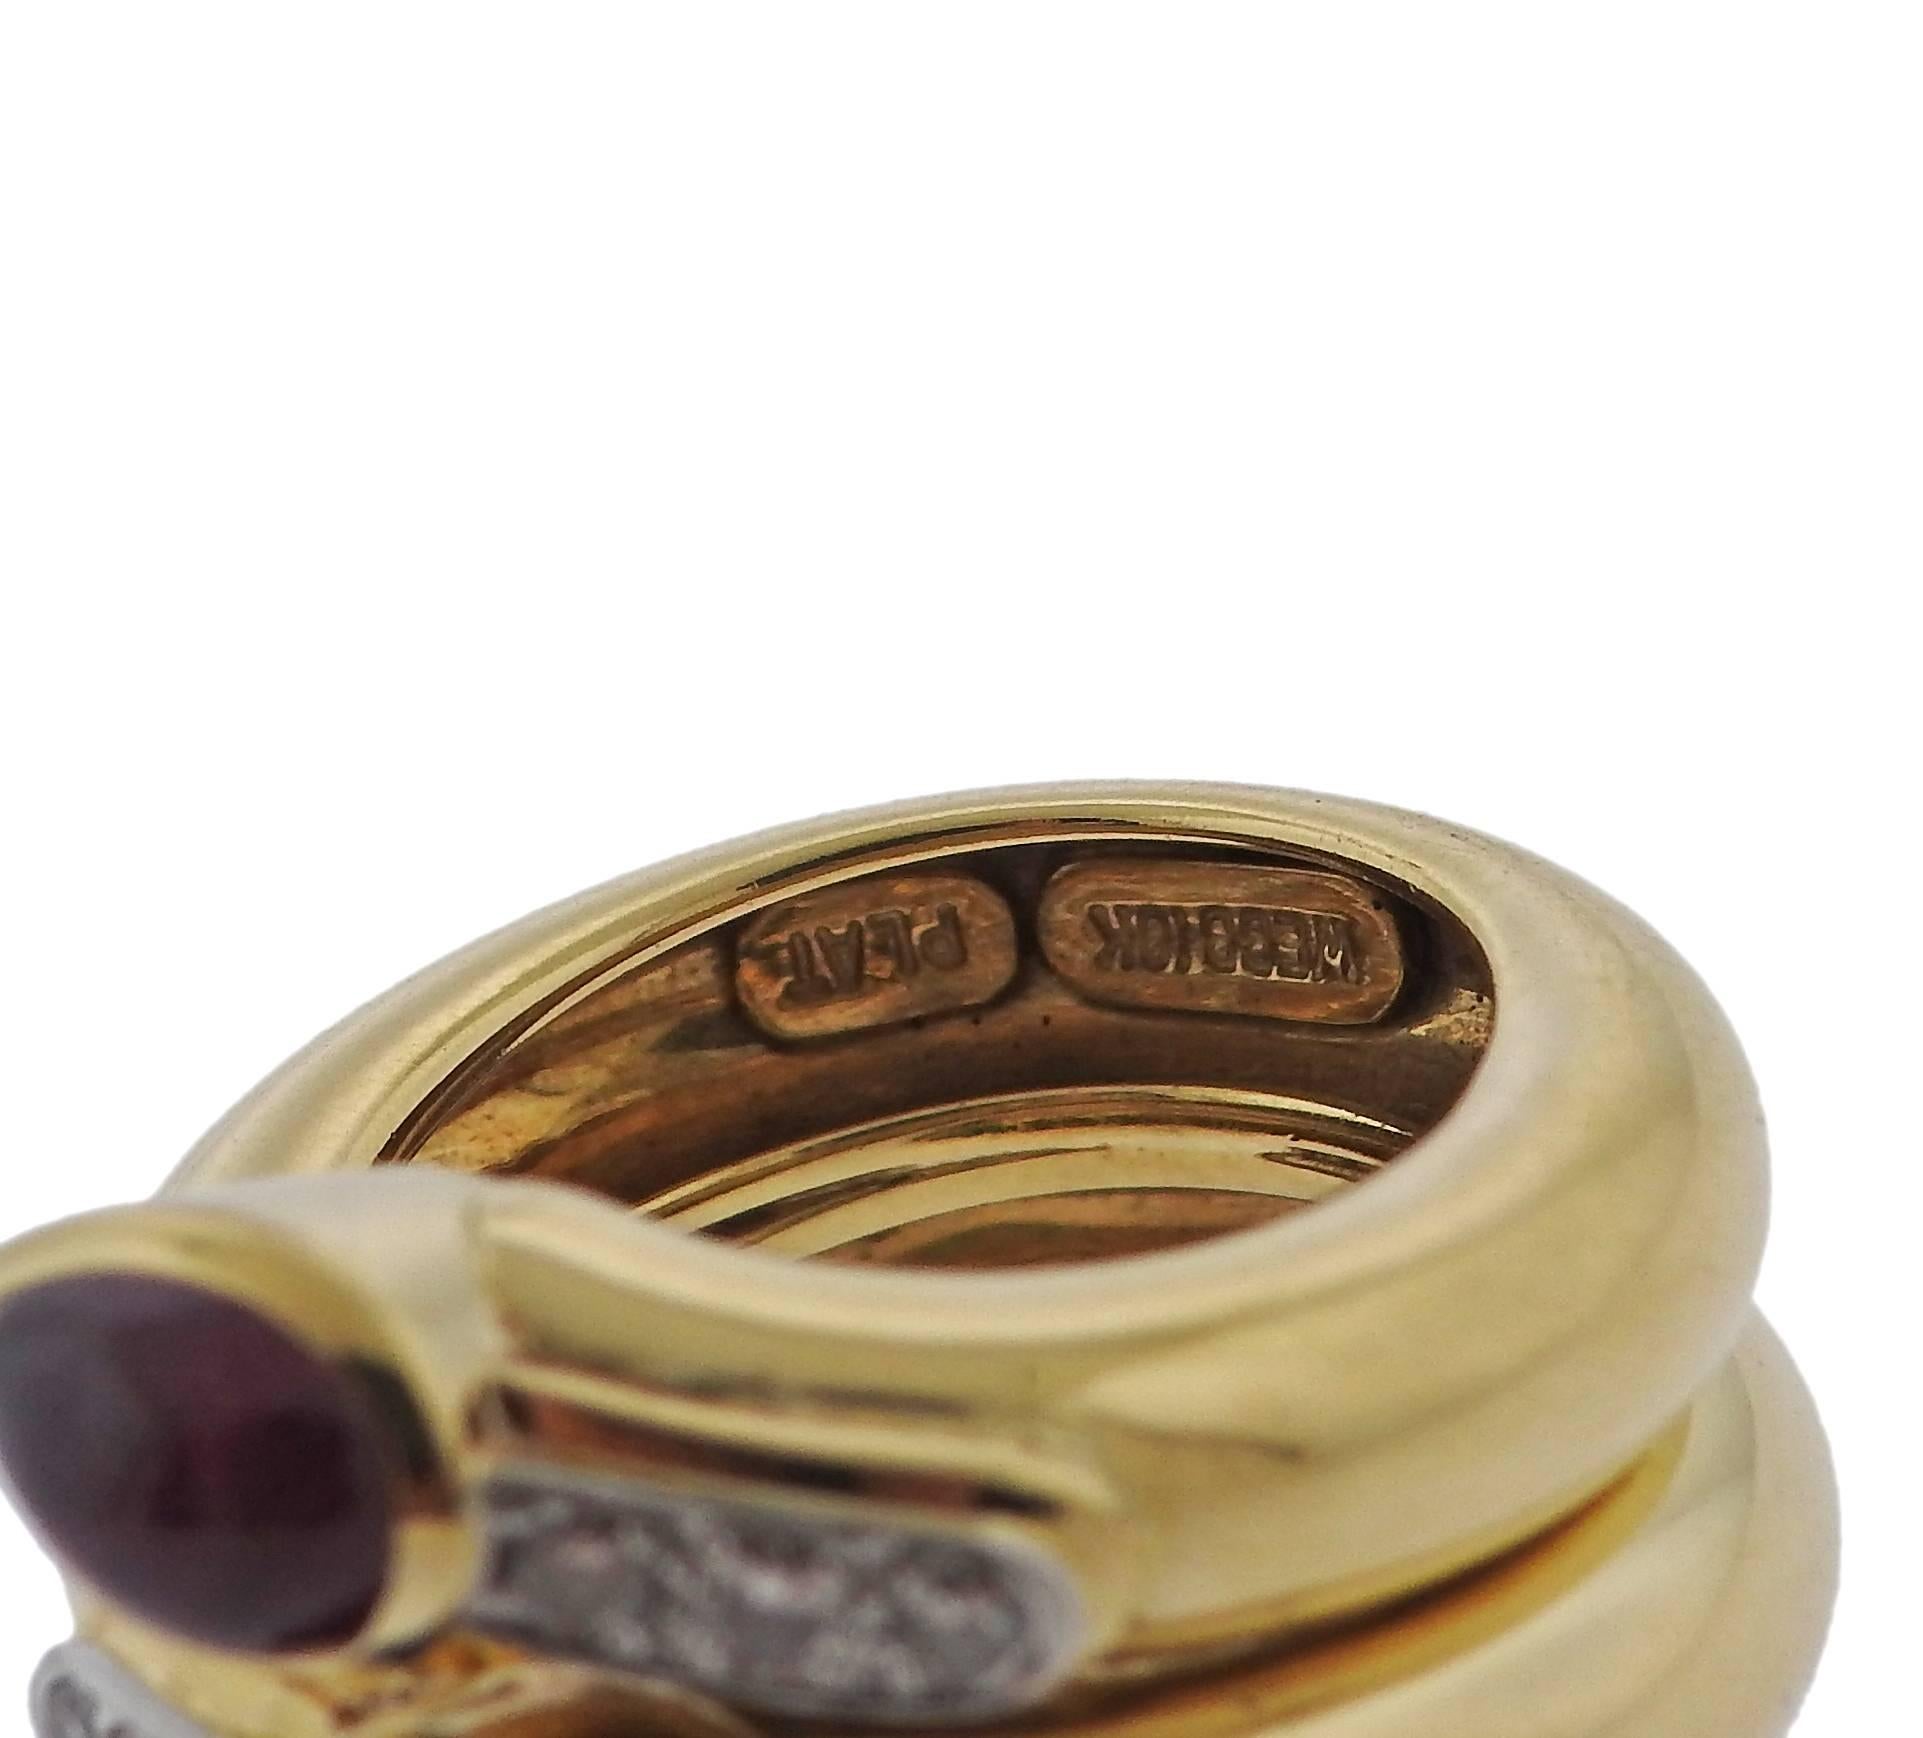 18k gold and platinum ring, crafted by David Webb, decorated with ruby, sapphire and emerald cabochons, surrounded with approx. 0.40ctw in diamonds. Ring size - 6 1/2, ring top is 24mm wide, weight - 23.1 grams. Marked: Webb, 18k, Plat 